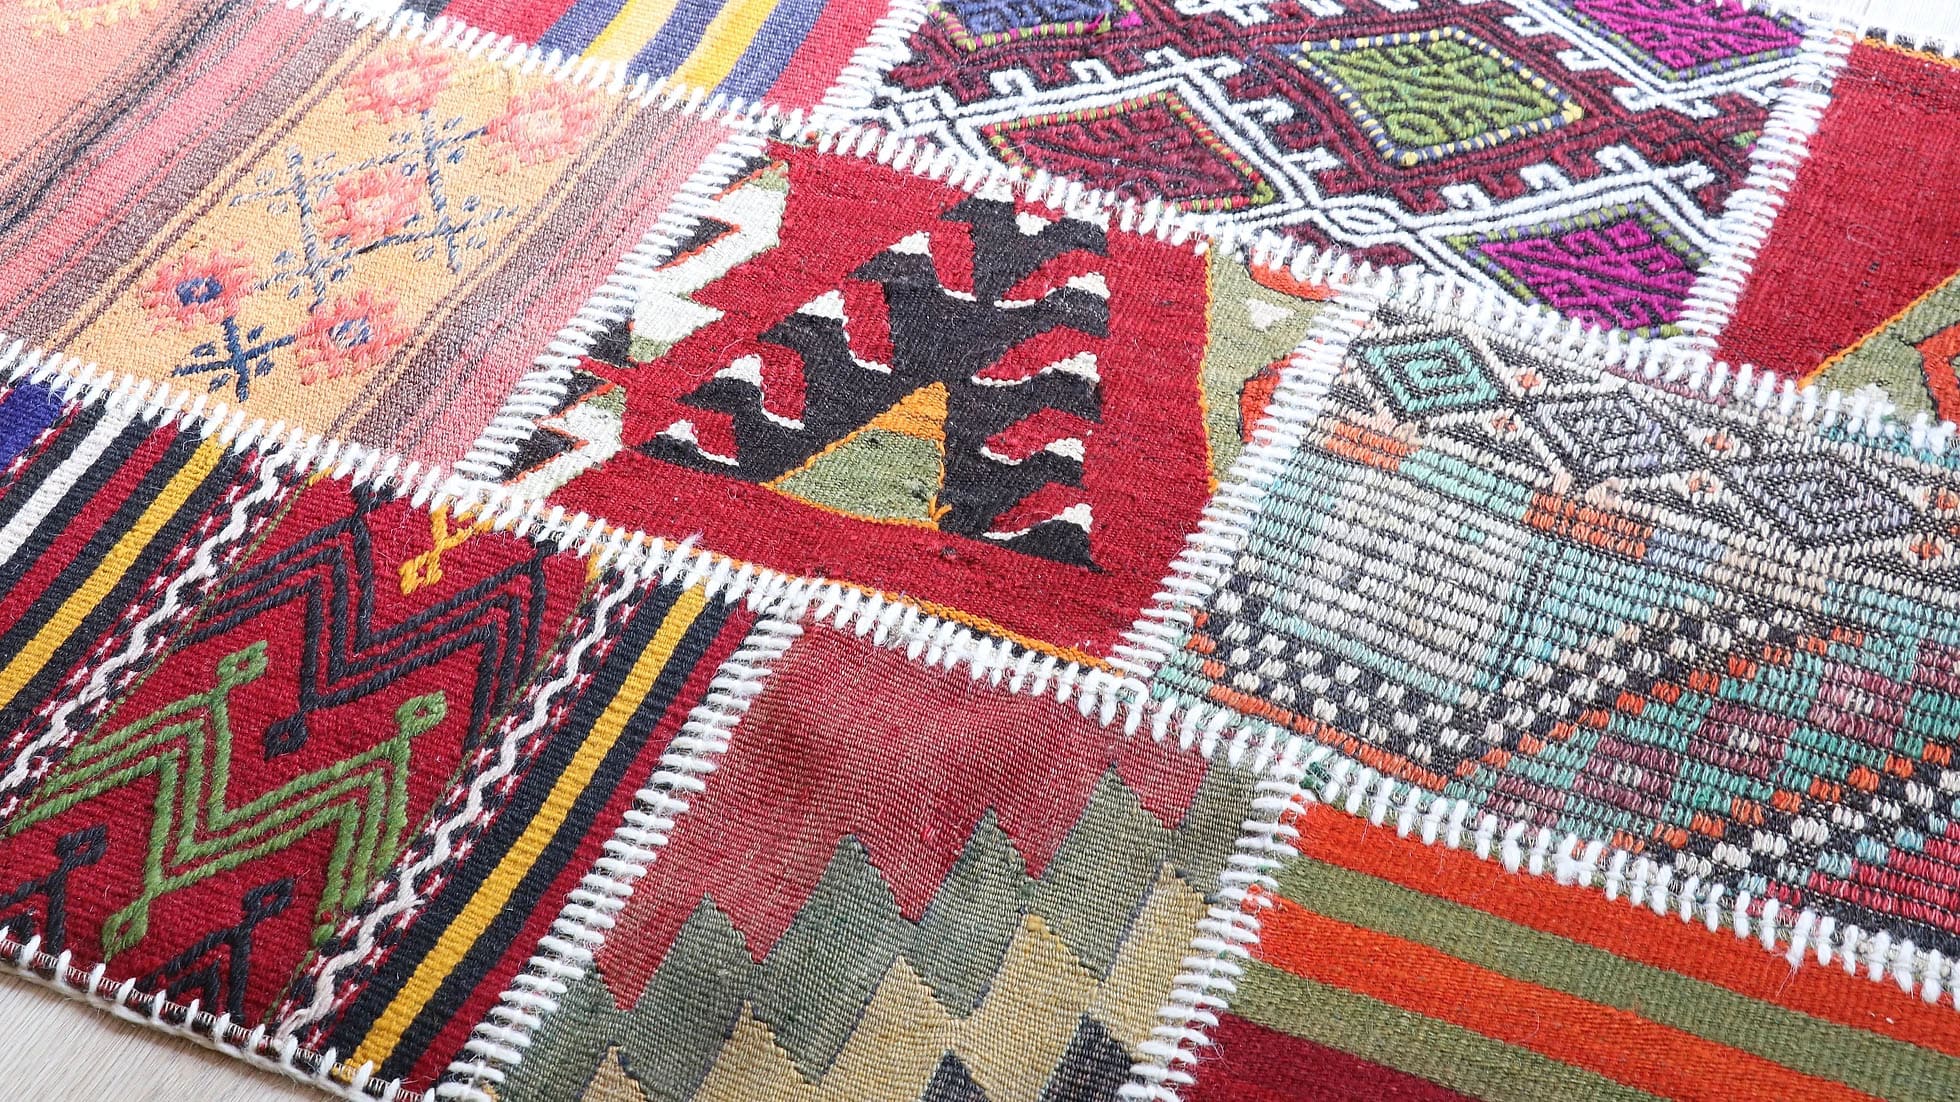 details of a handwoven traditional turkish kilim rug in colorful pattern